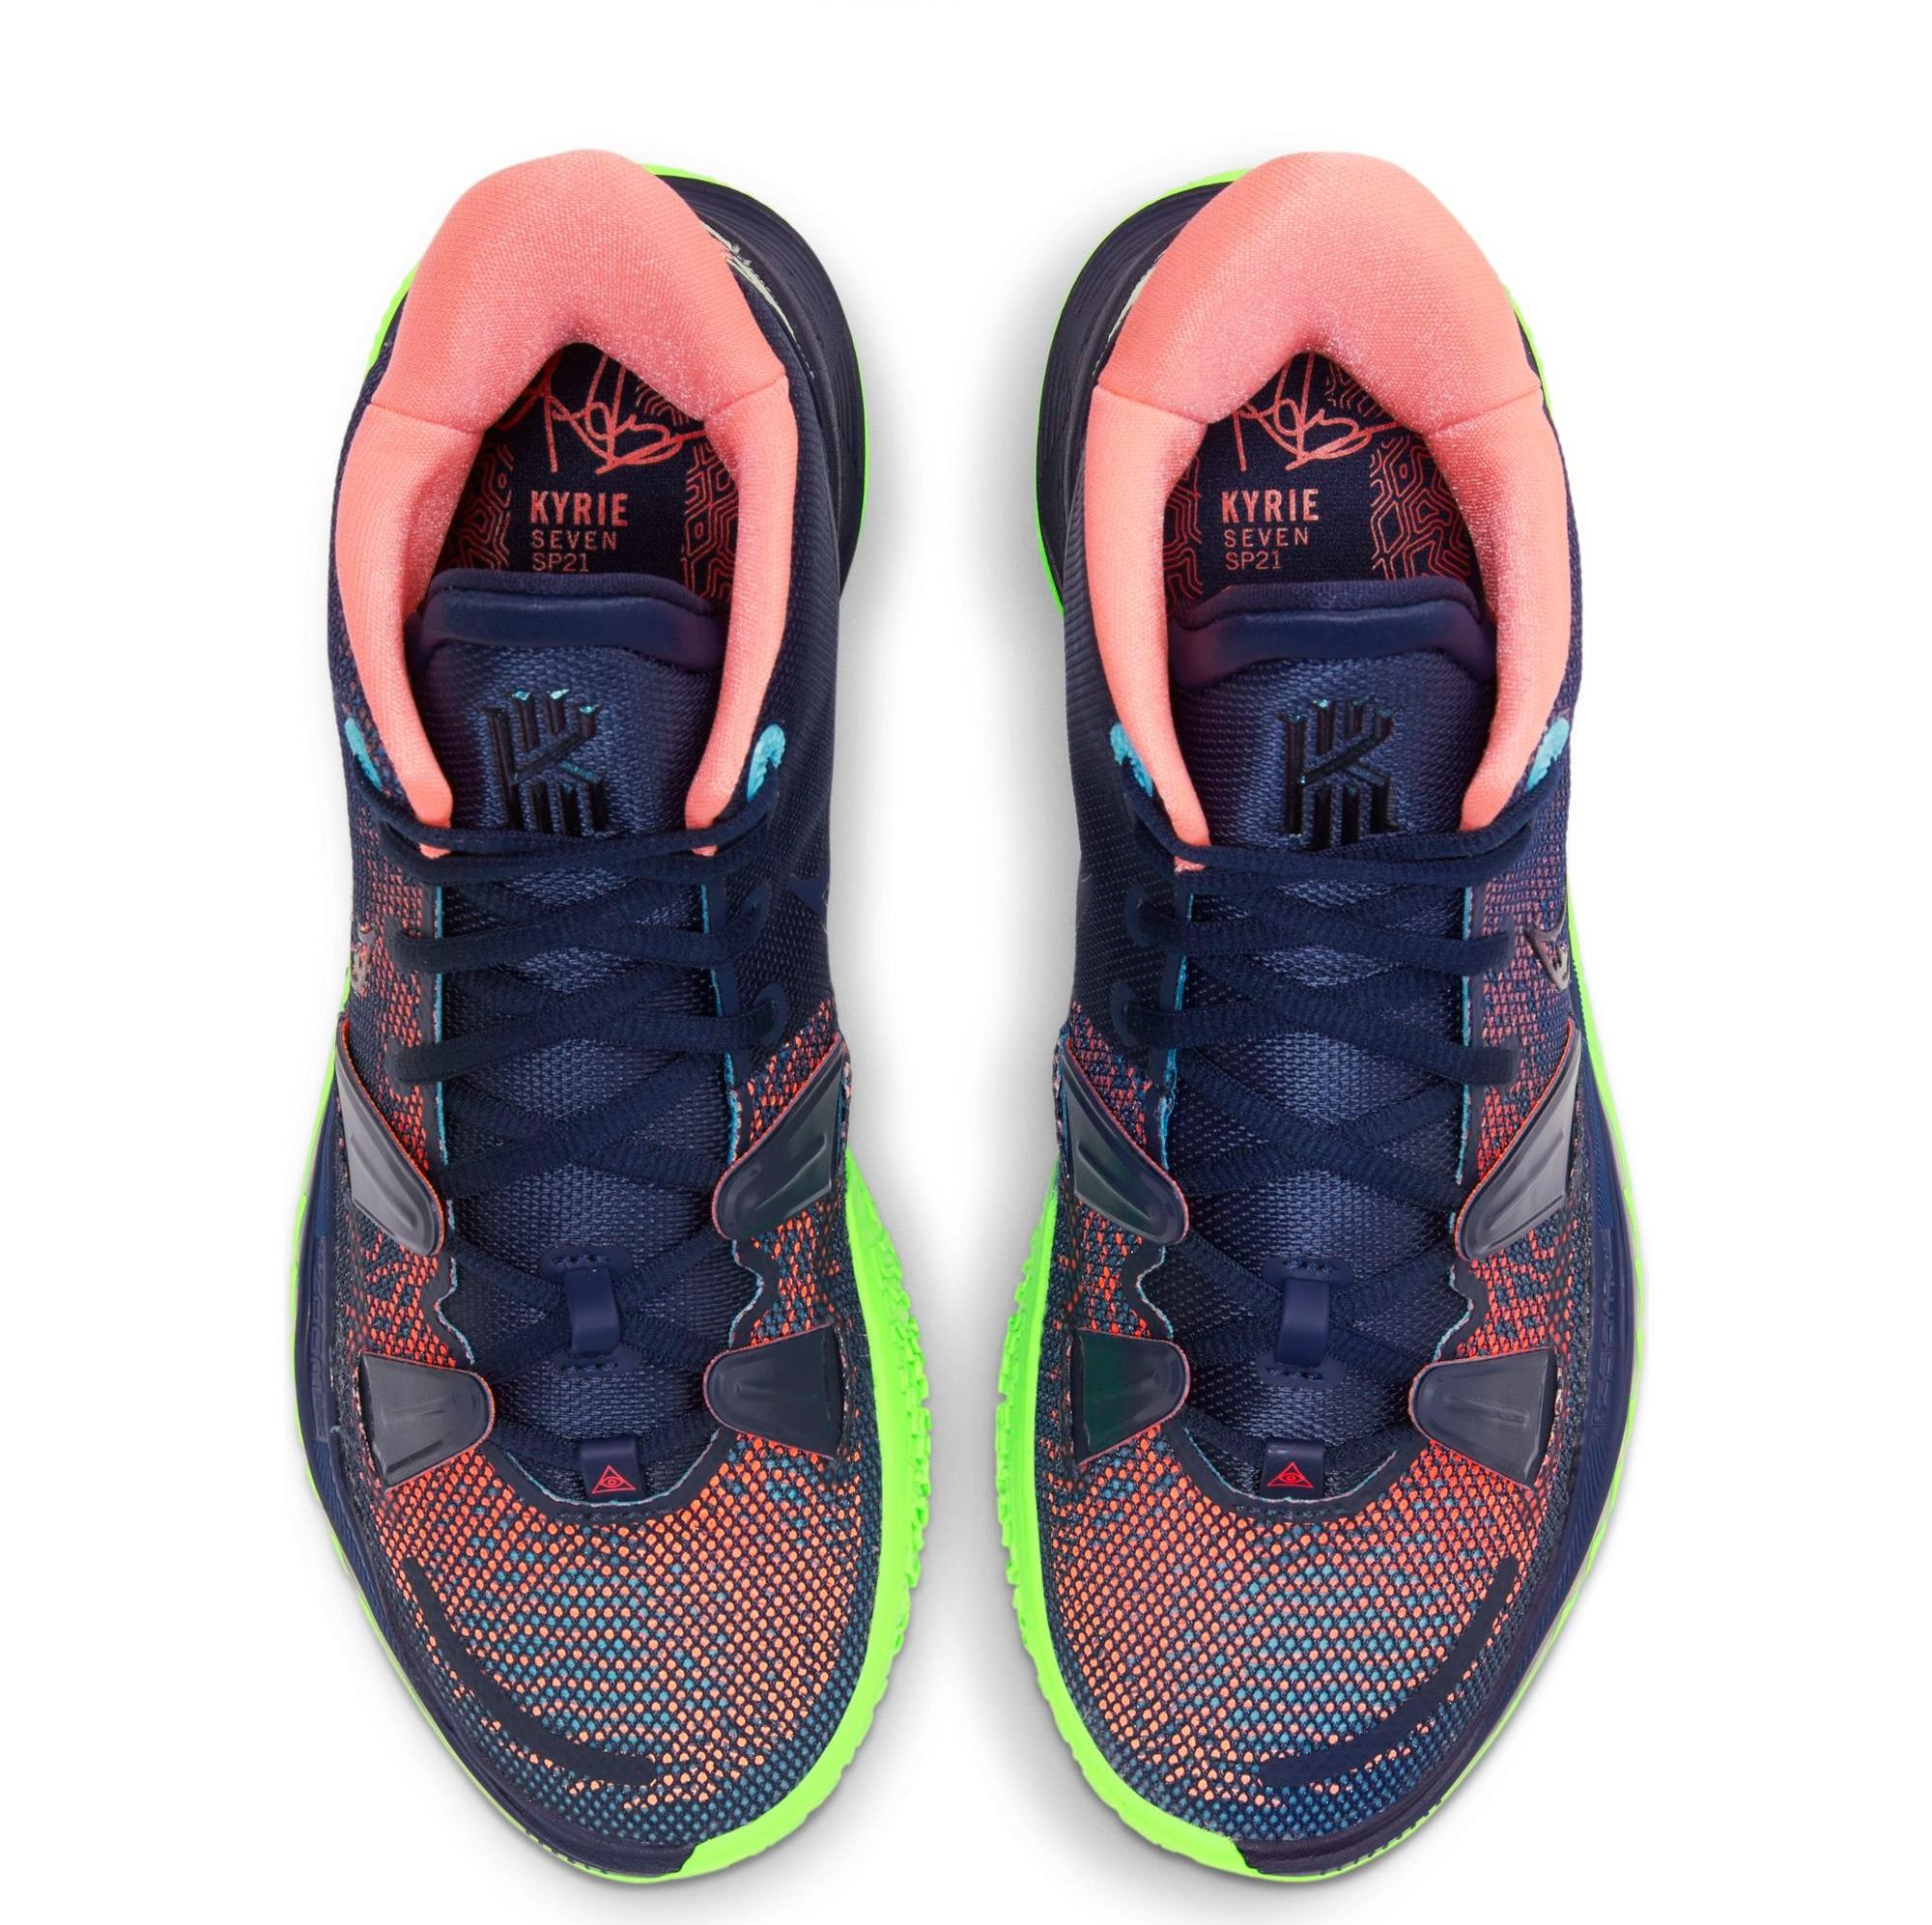 Sneakers Release – Nike Kyrie 7 “Midnight Navy” Colorway Launching Feb. 19